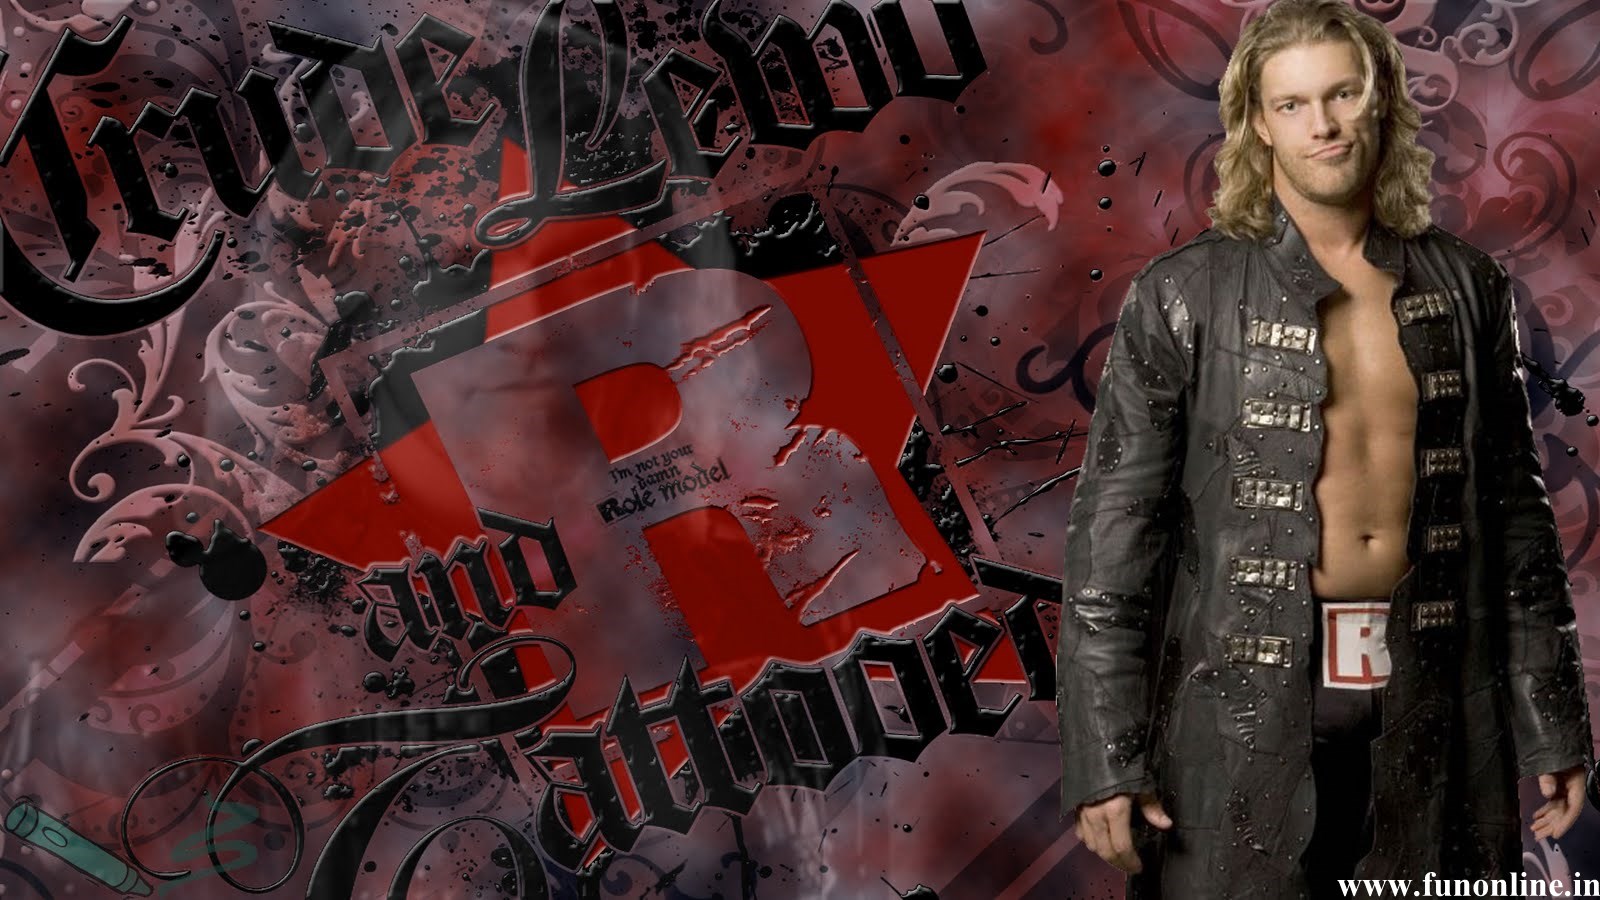 Edge Wallpaper R Rated Wwe Superstar S HD